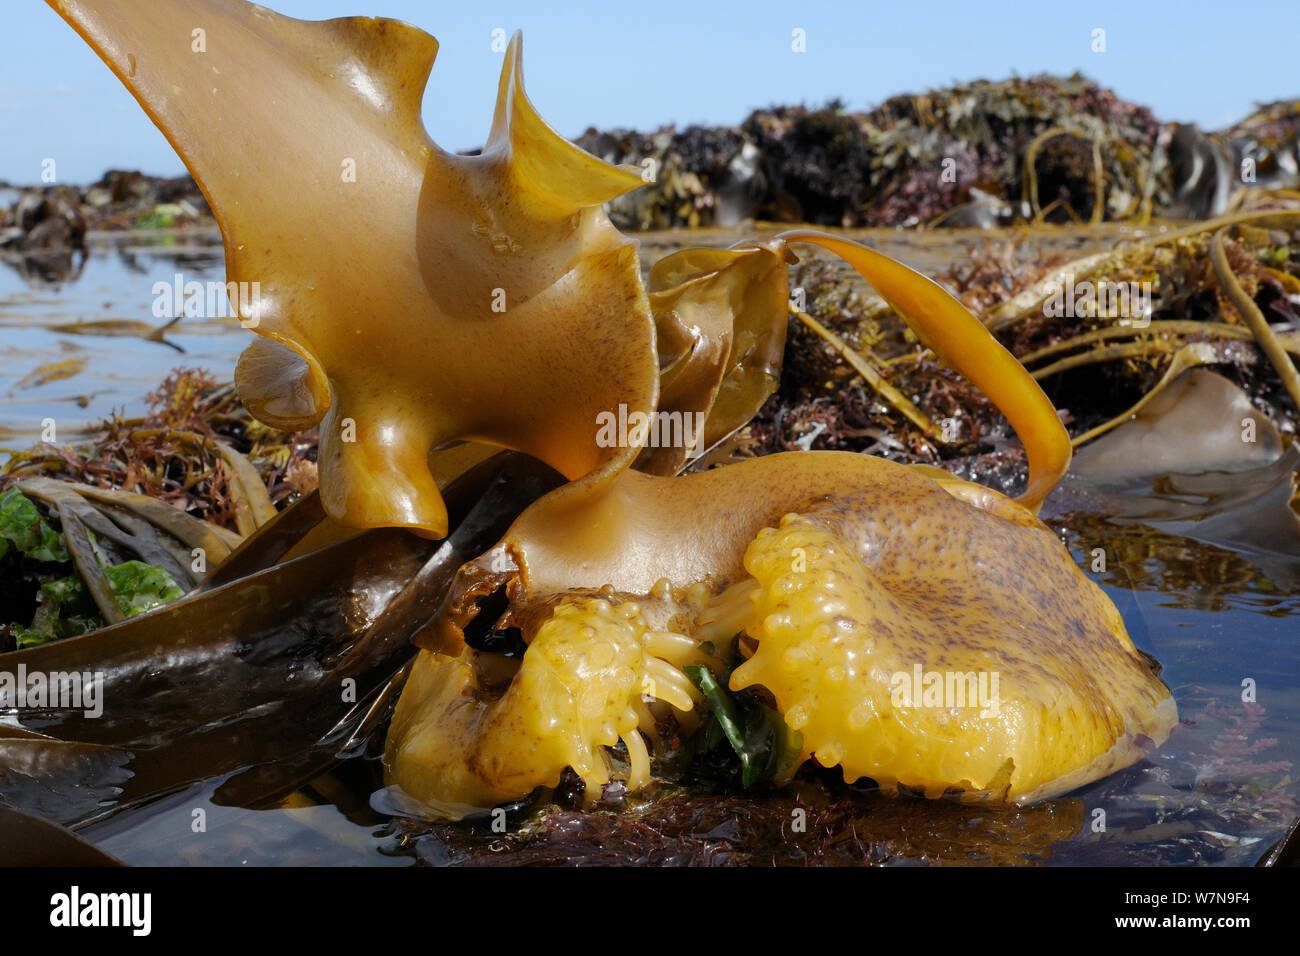 Bulbous holdfast of Furbellows (Saccorhiza polyschides), a large kelp, attached to rocks very low on the shore alongside Thongweed (Himanthalia elongata) and Tangleweed kelp (Laminaria digitata), near Falmouth, Cornwall, UK, August. Stock Photo